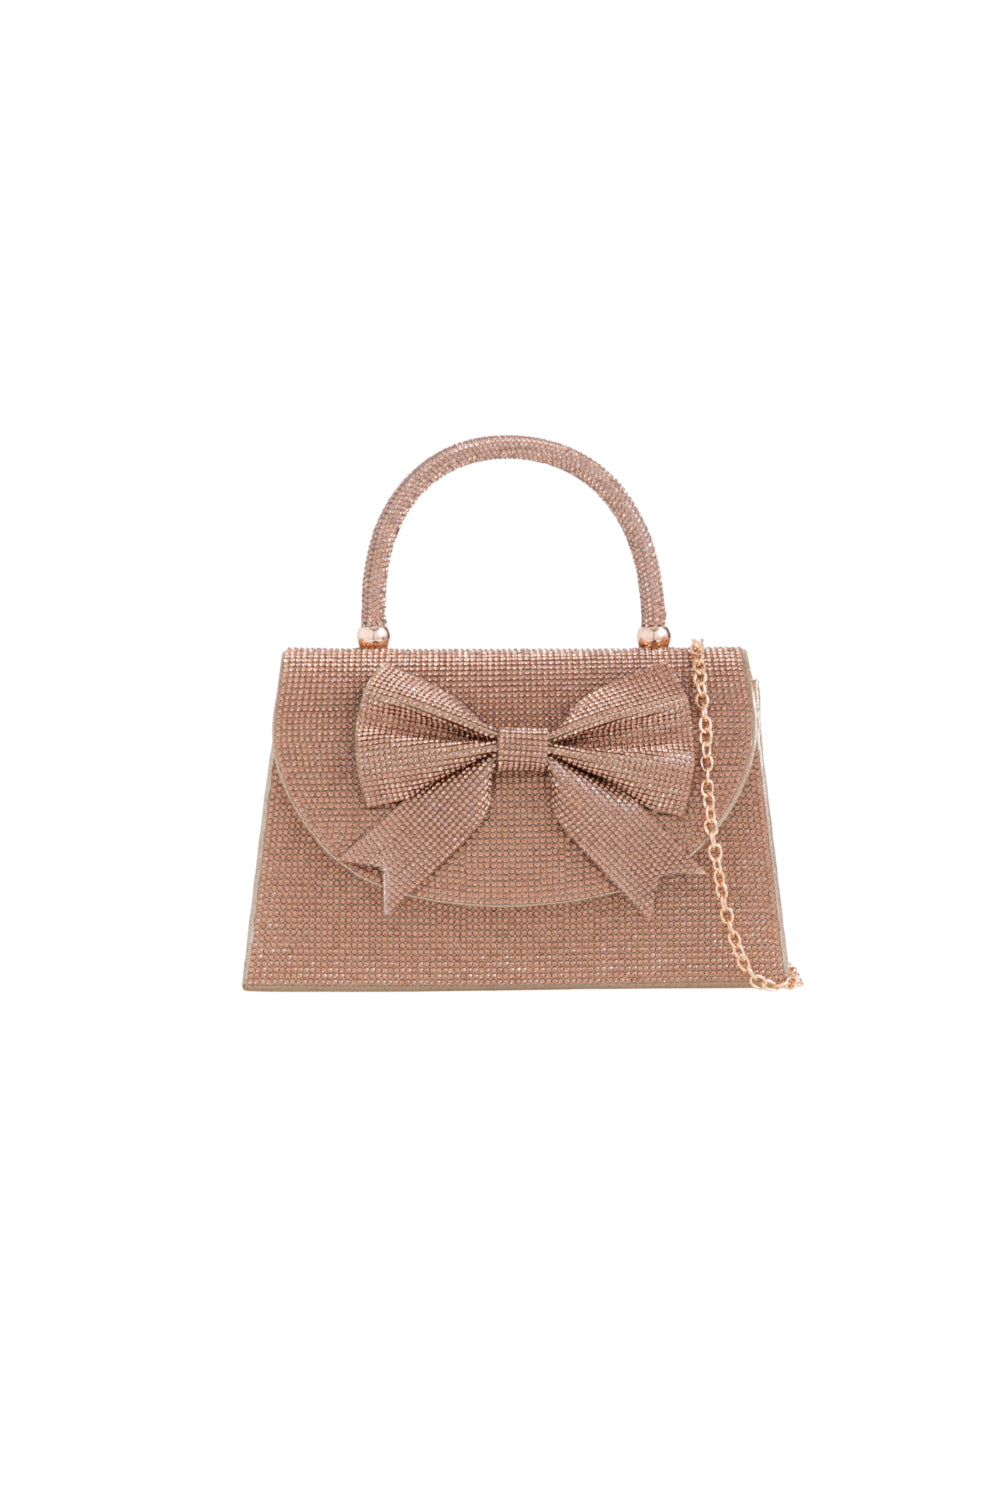 Gold Diamante Evening Bag With Bow